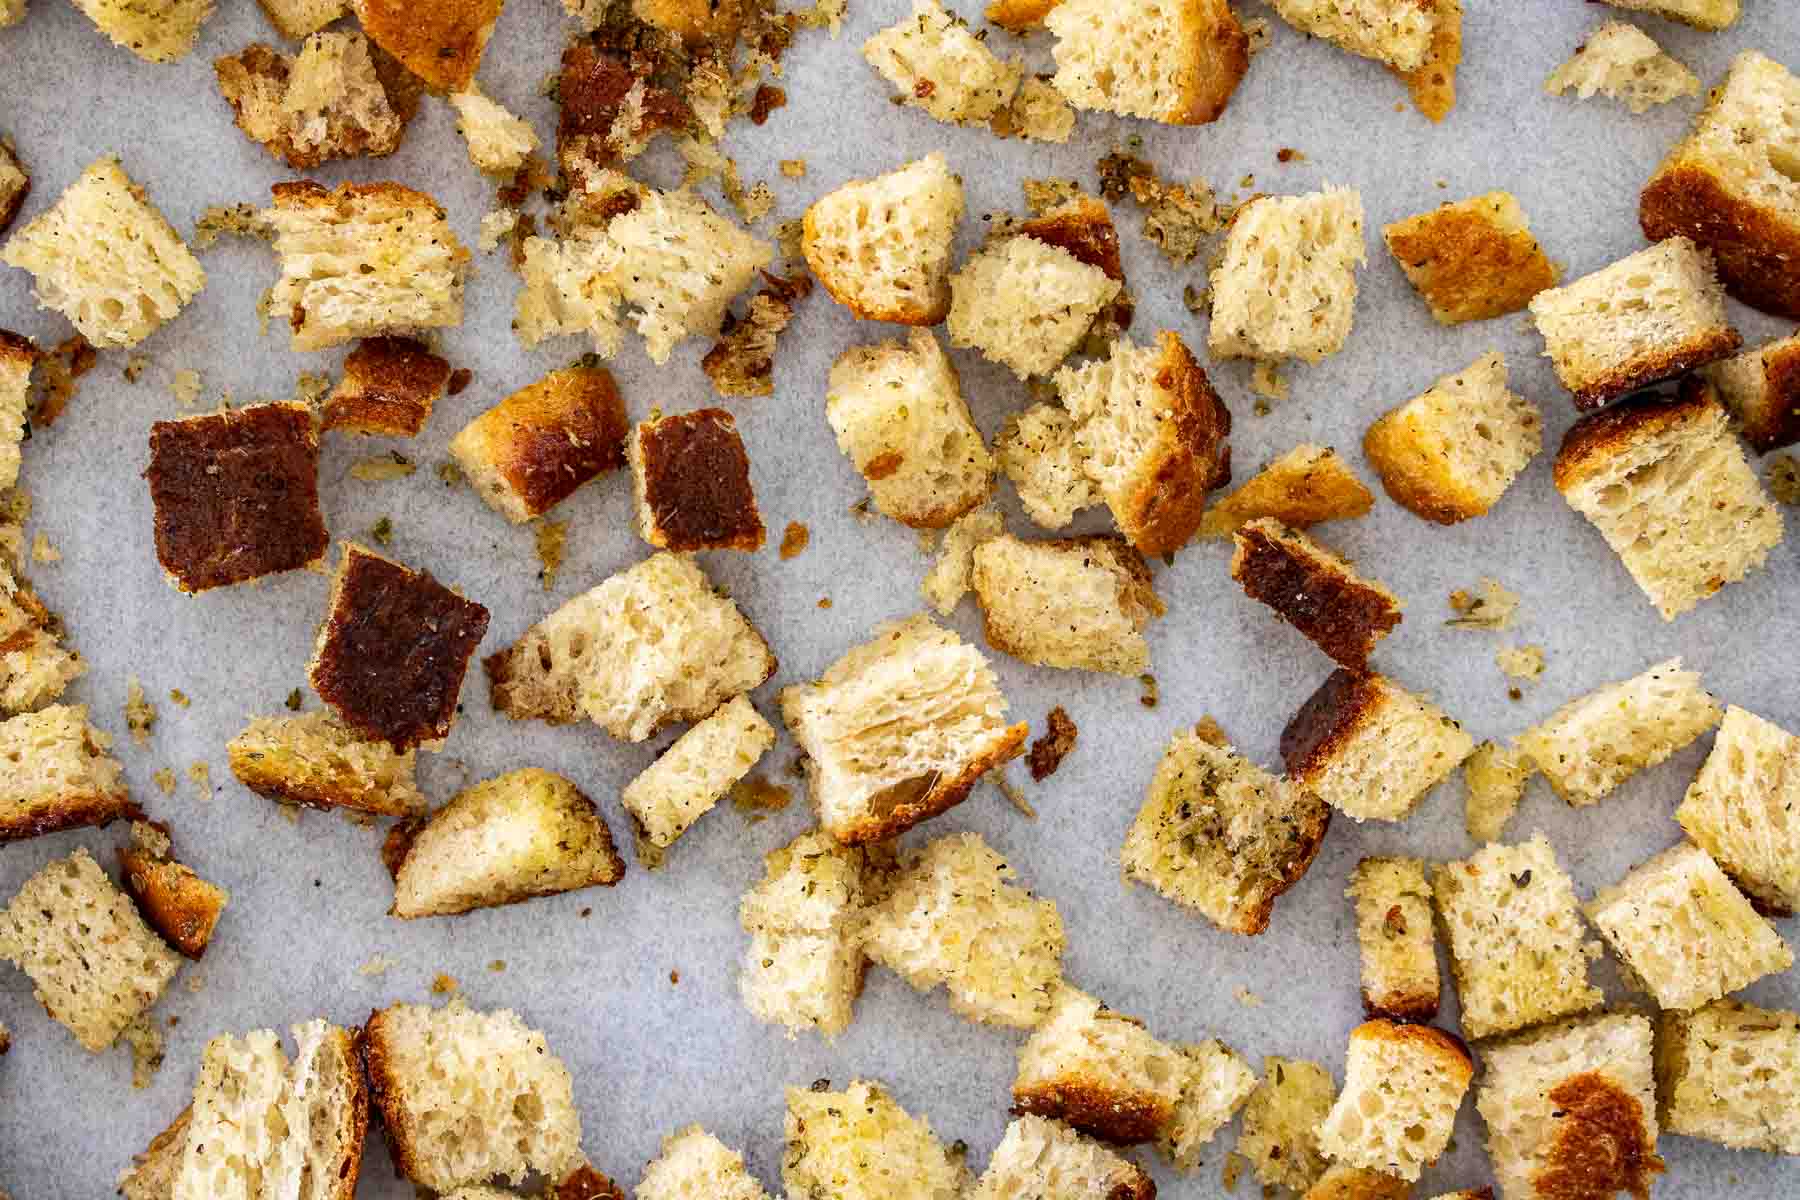 Croutons ready to bake.